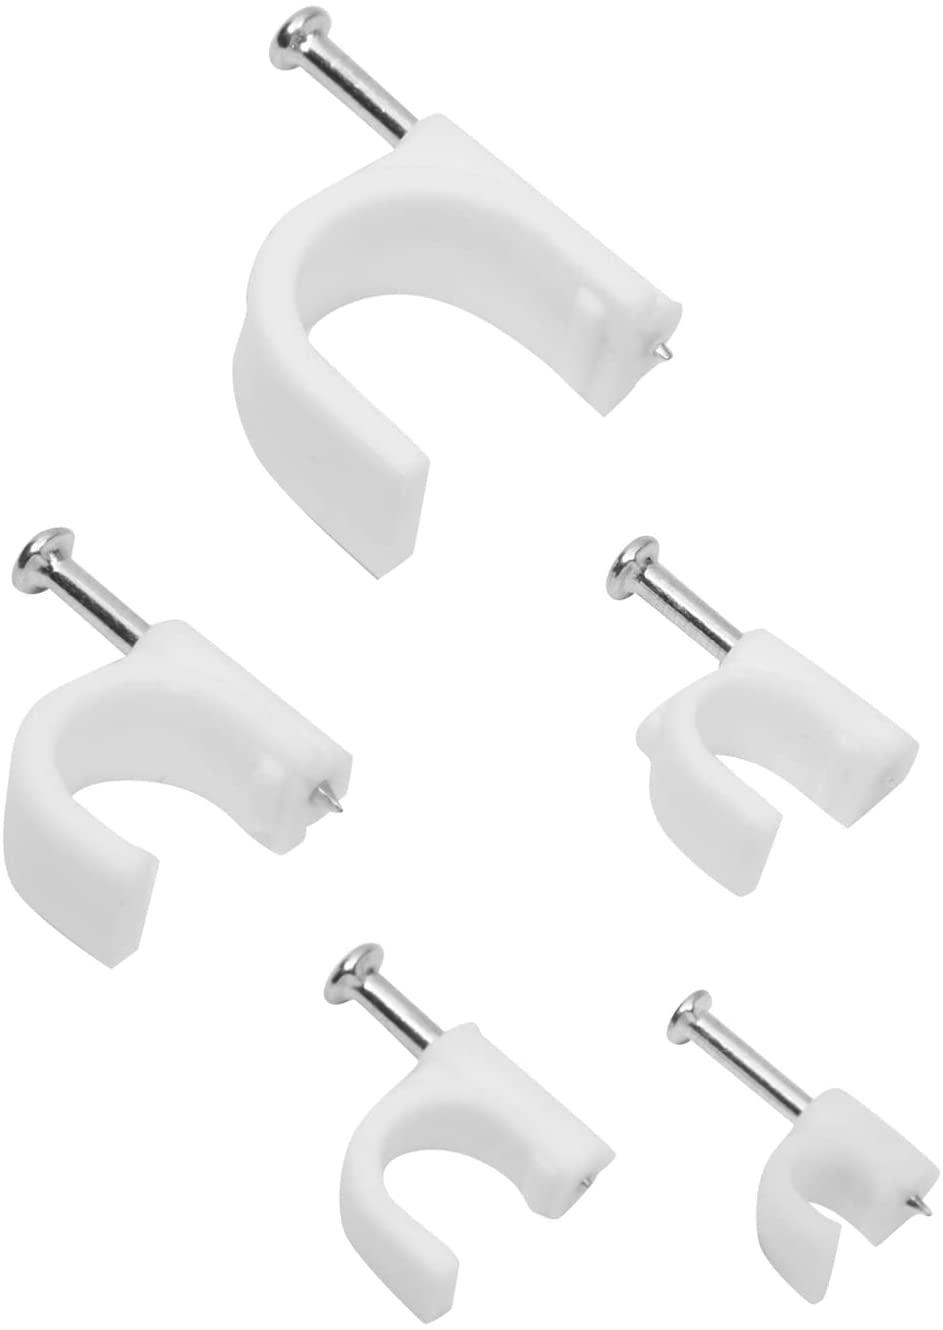 500 Pack Round Cable Wire Clips for Wall Mounted Cord Management in 5 Sizes, White (4mm, 6mm, 8mm, 10mm, 14mm) - Lasercutwraps Shop